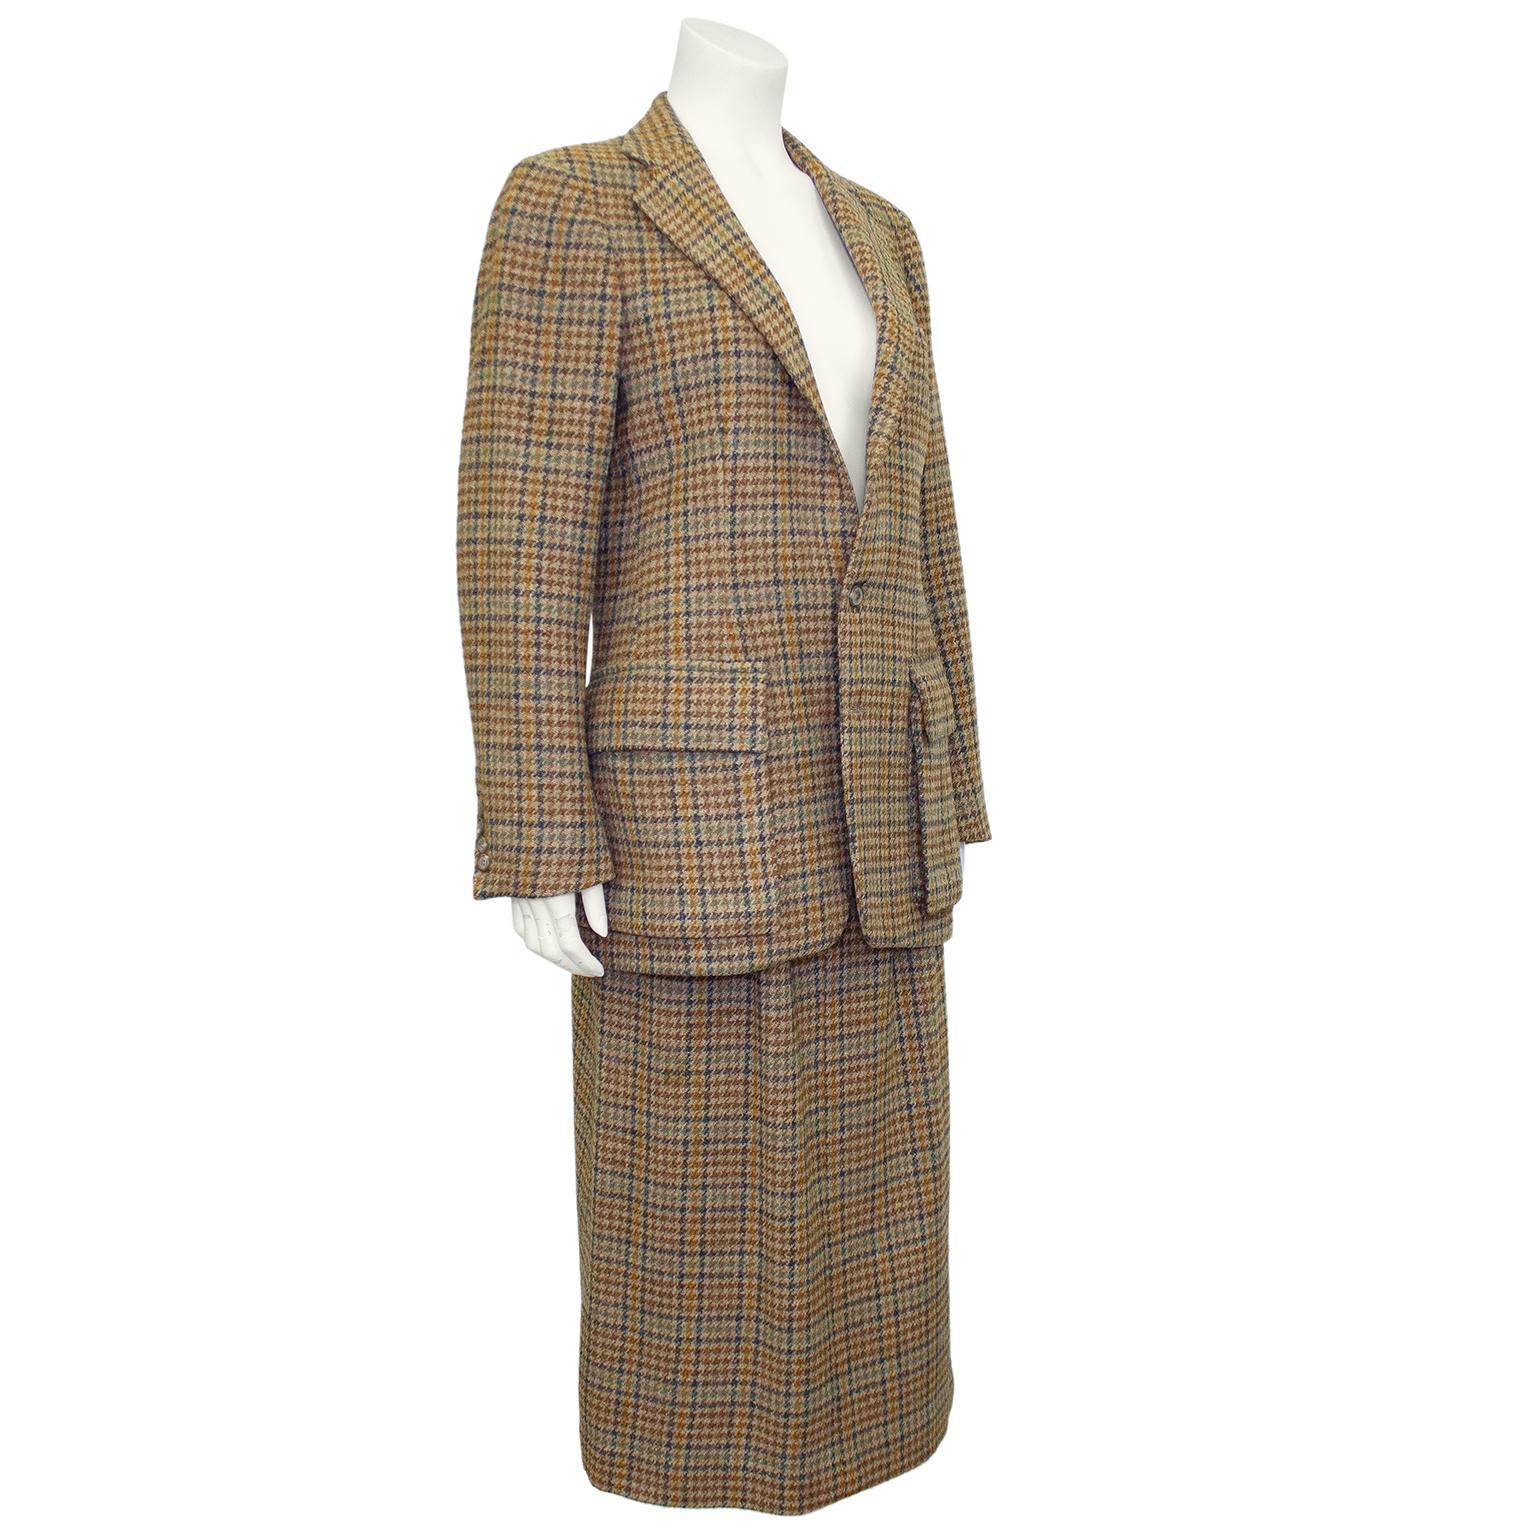 Classically preppy Ralph Lauren suit from the 1990s. Tan wool mini houndstooth with contrasting brown, navy, teal and caramel throughout. Hacking jacket features a notched collar, two button closure, four mini buttons at cuffs, a horizontal slit